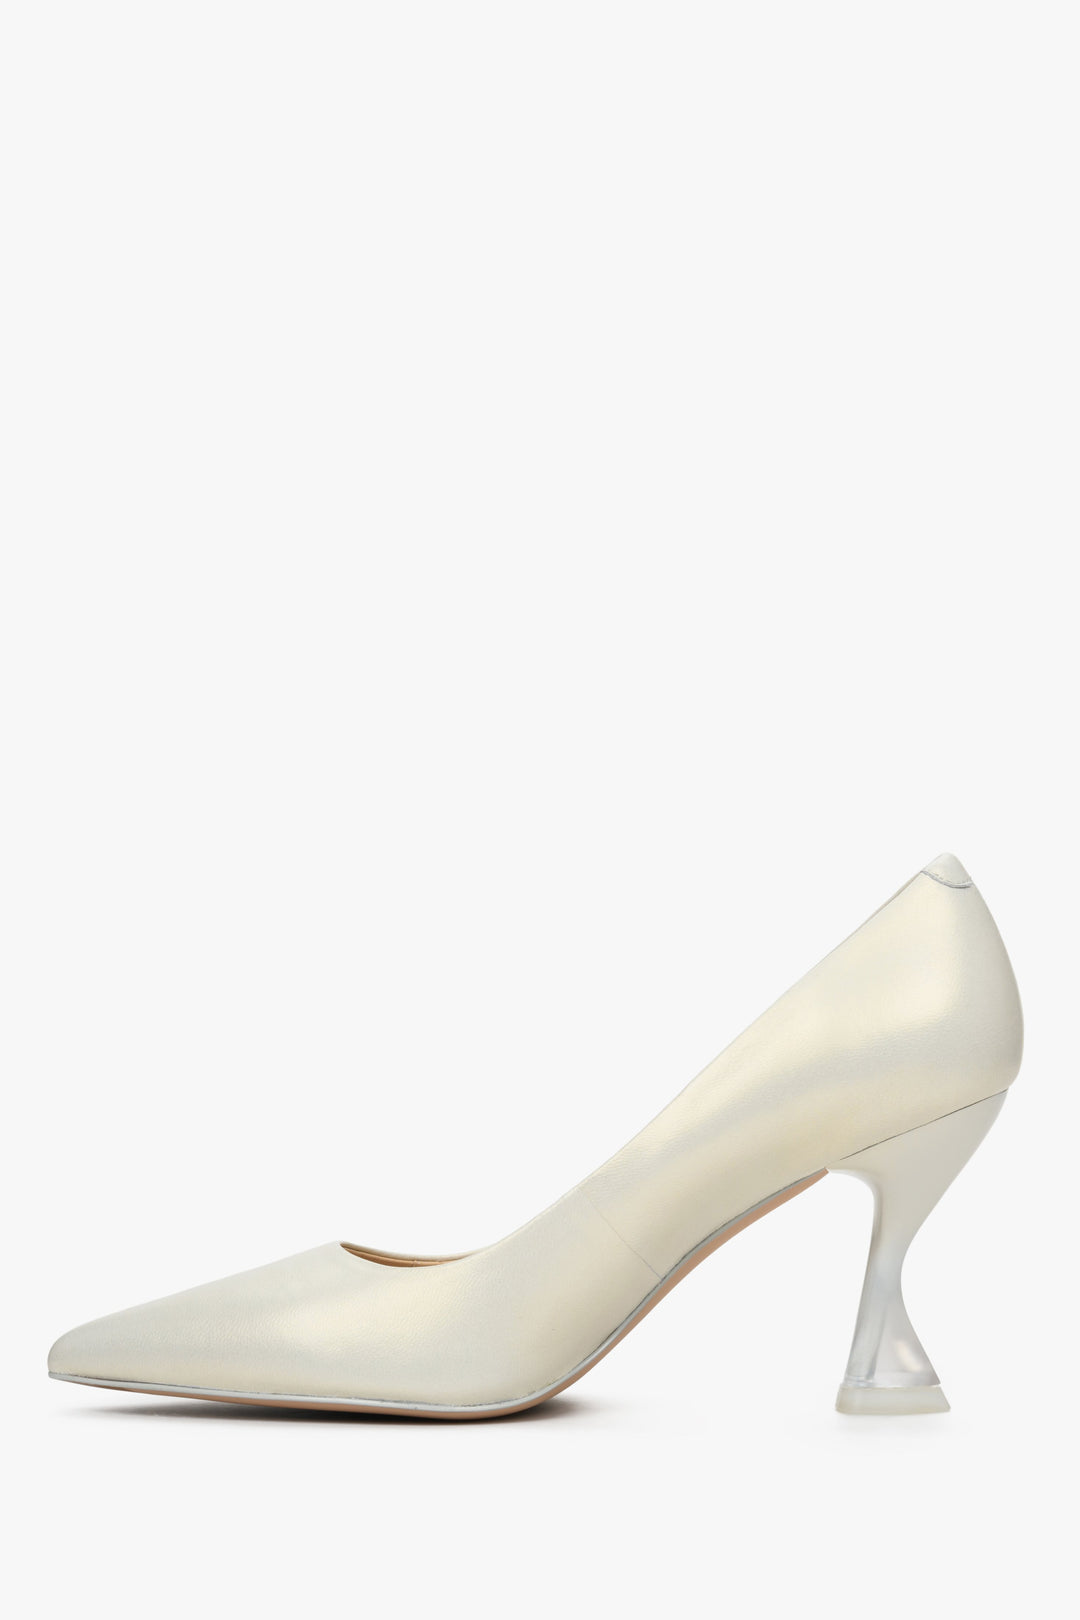 Pearlescent leather Estro women's high-heeled pumps - shoe profile.